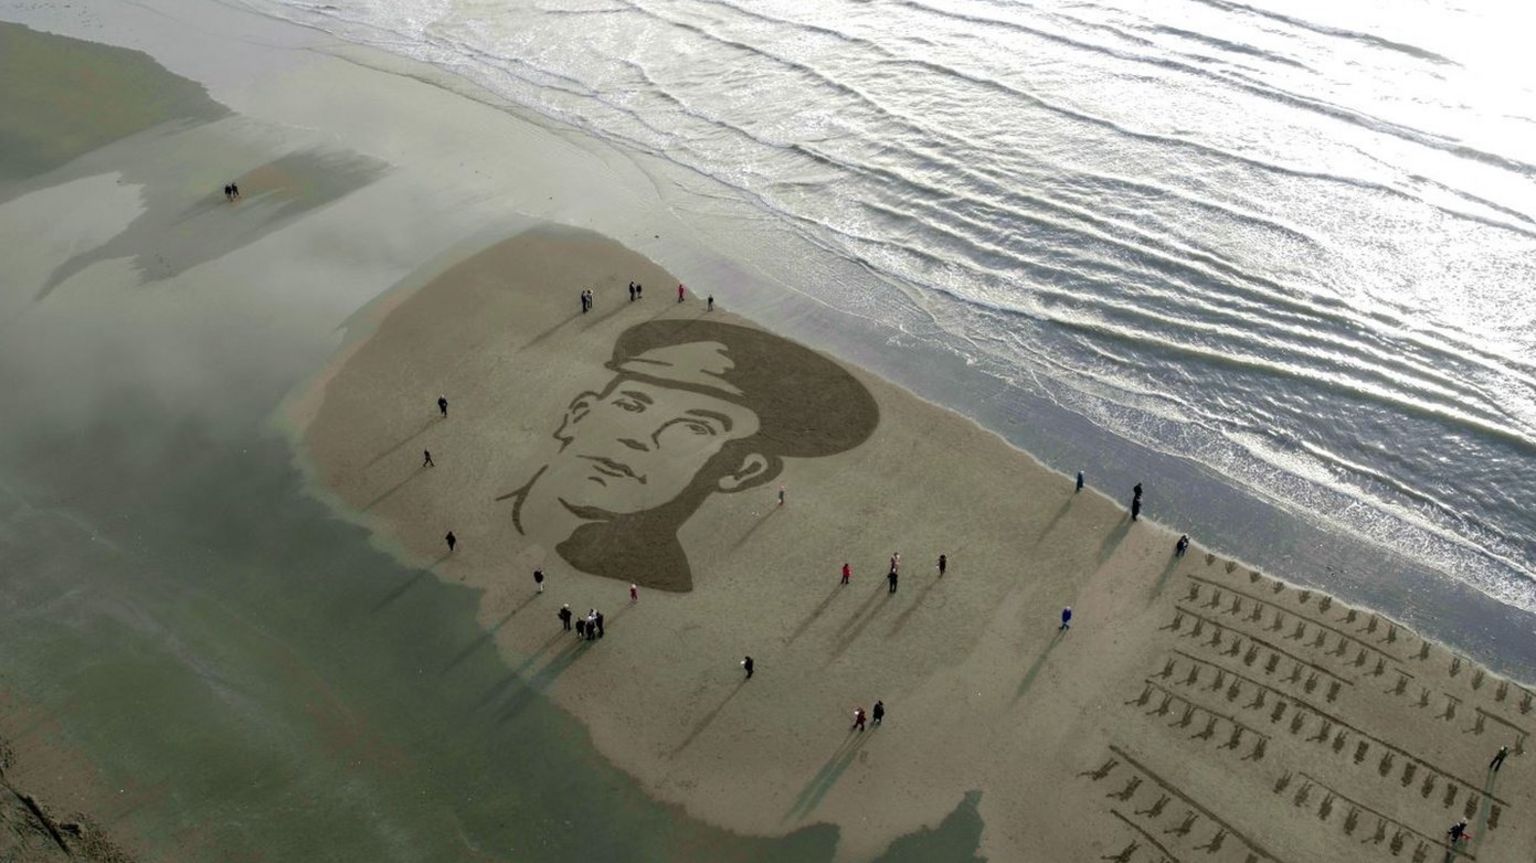 A portrait of John McCance, a soldier from County Down who died at Passchendaele, is drawn in the sand at Murlough Beach